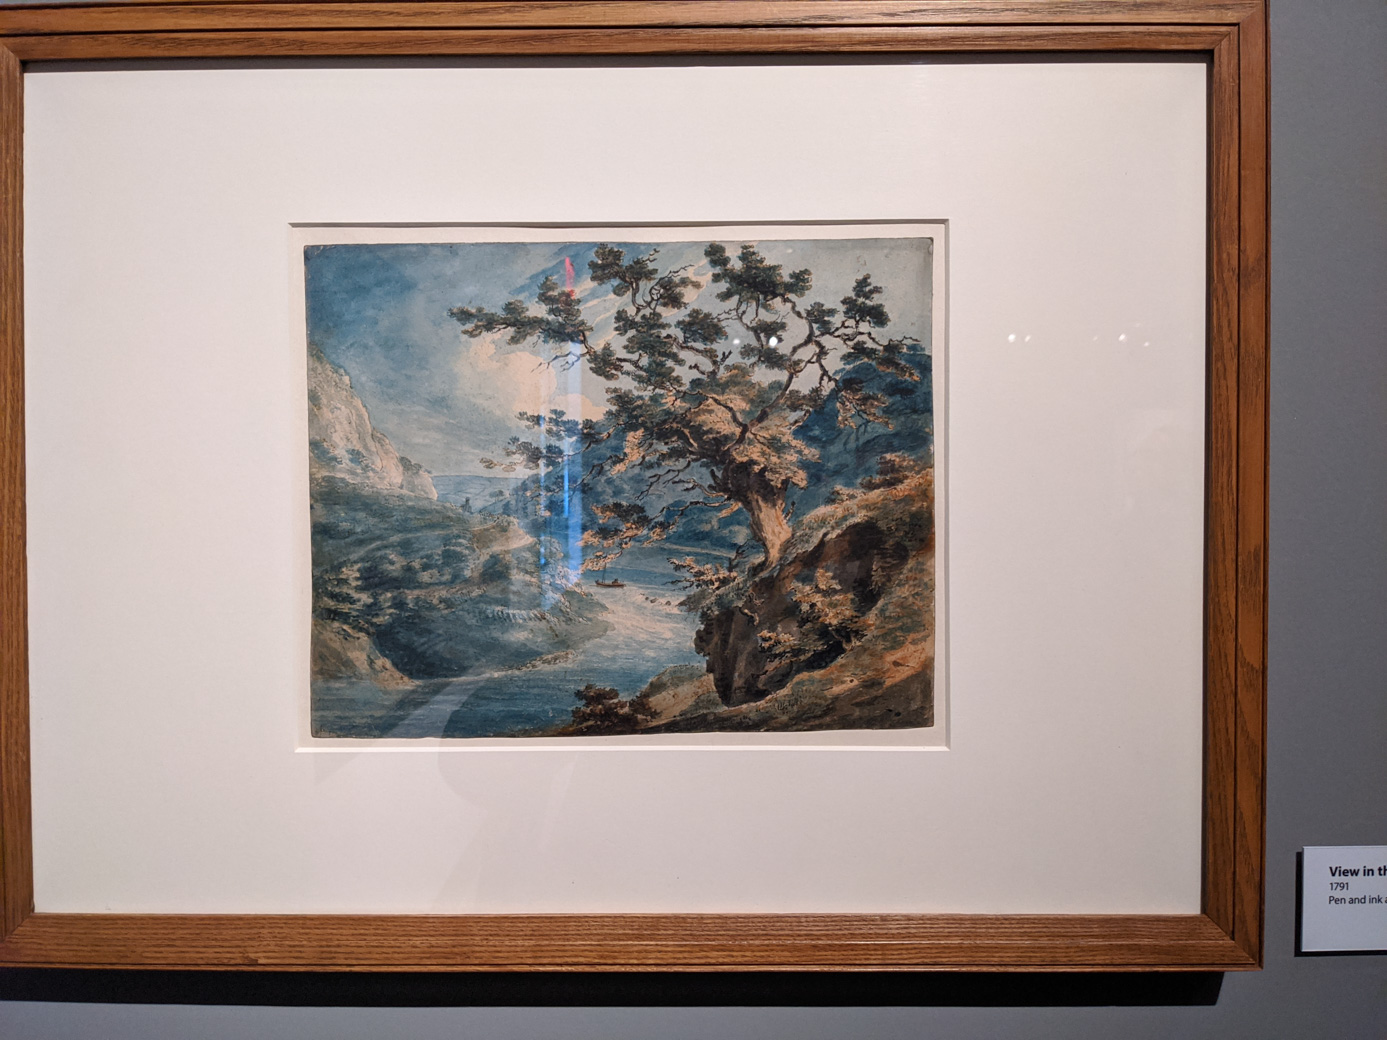 Early landscape by Turner, featuring a tree by a river